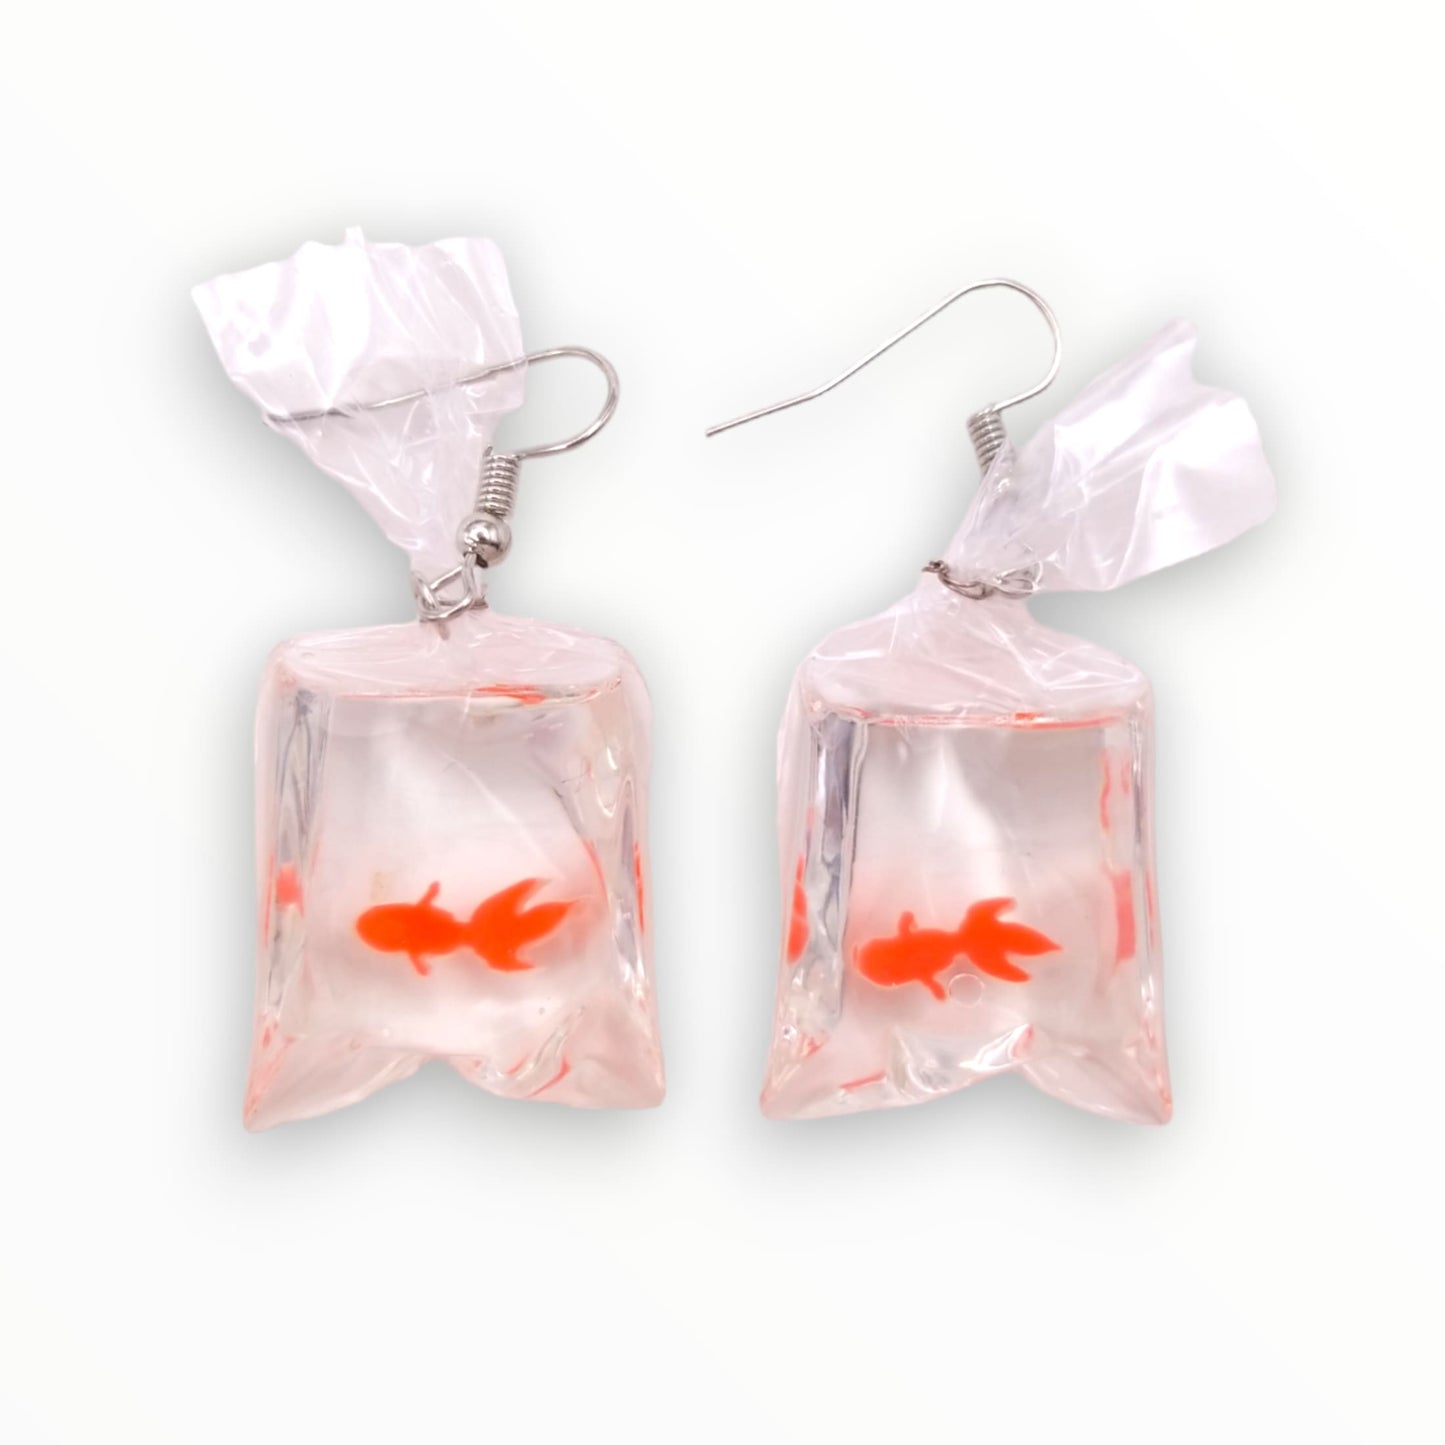 Orange Fish Earrings from Confetti Kitty, Only 7.99